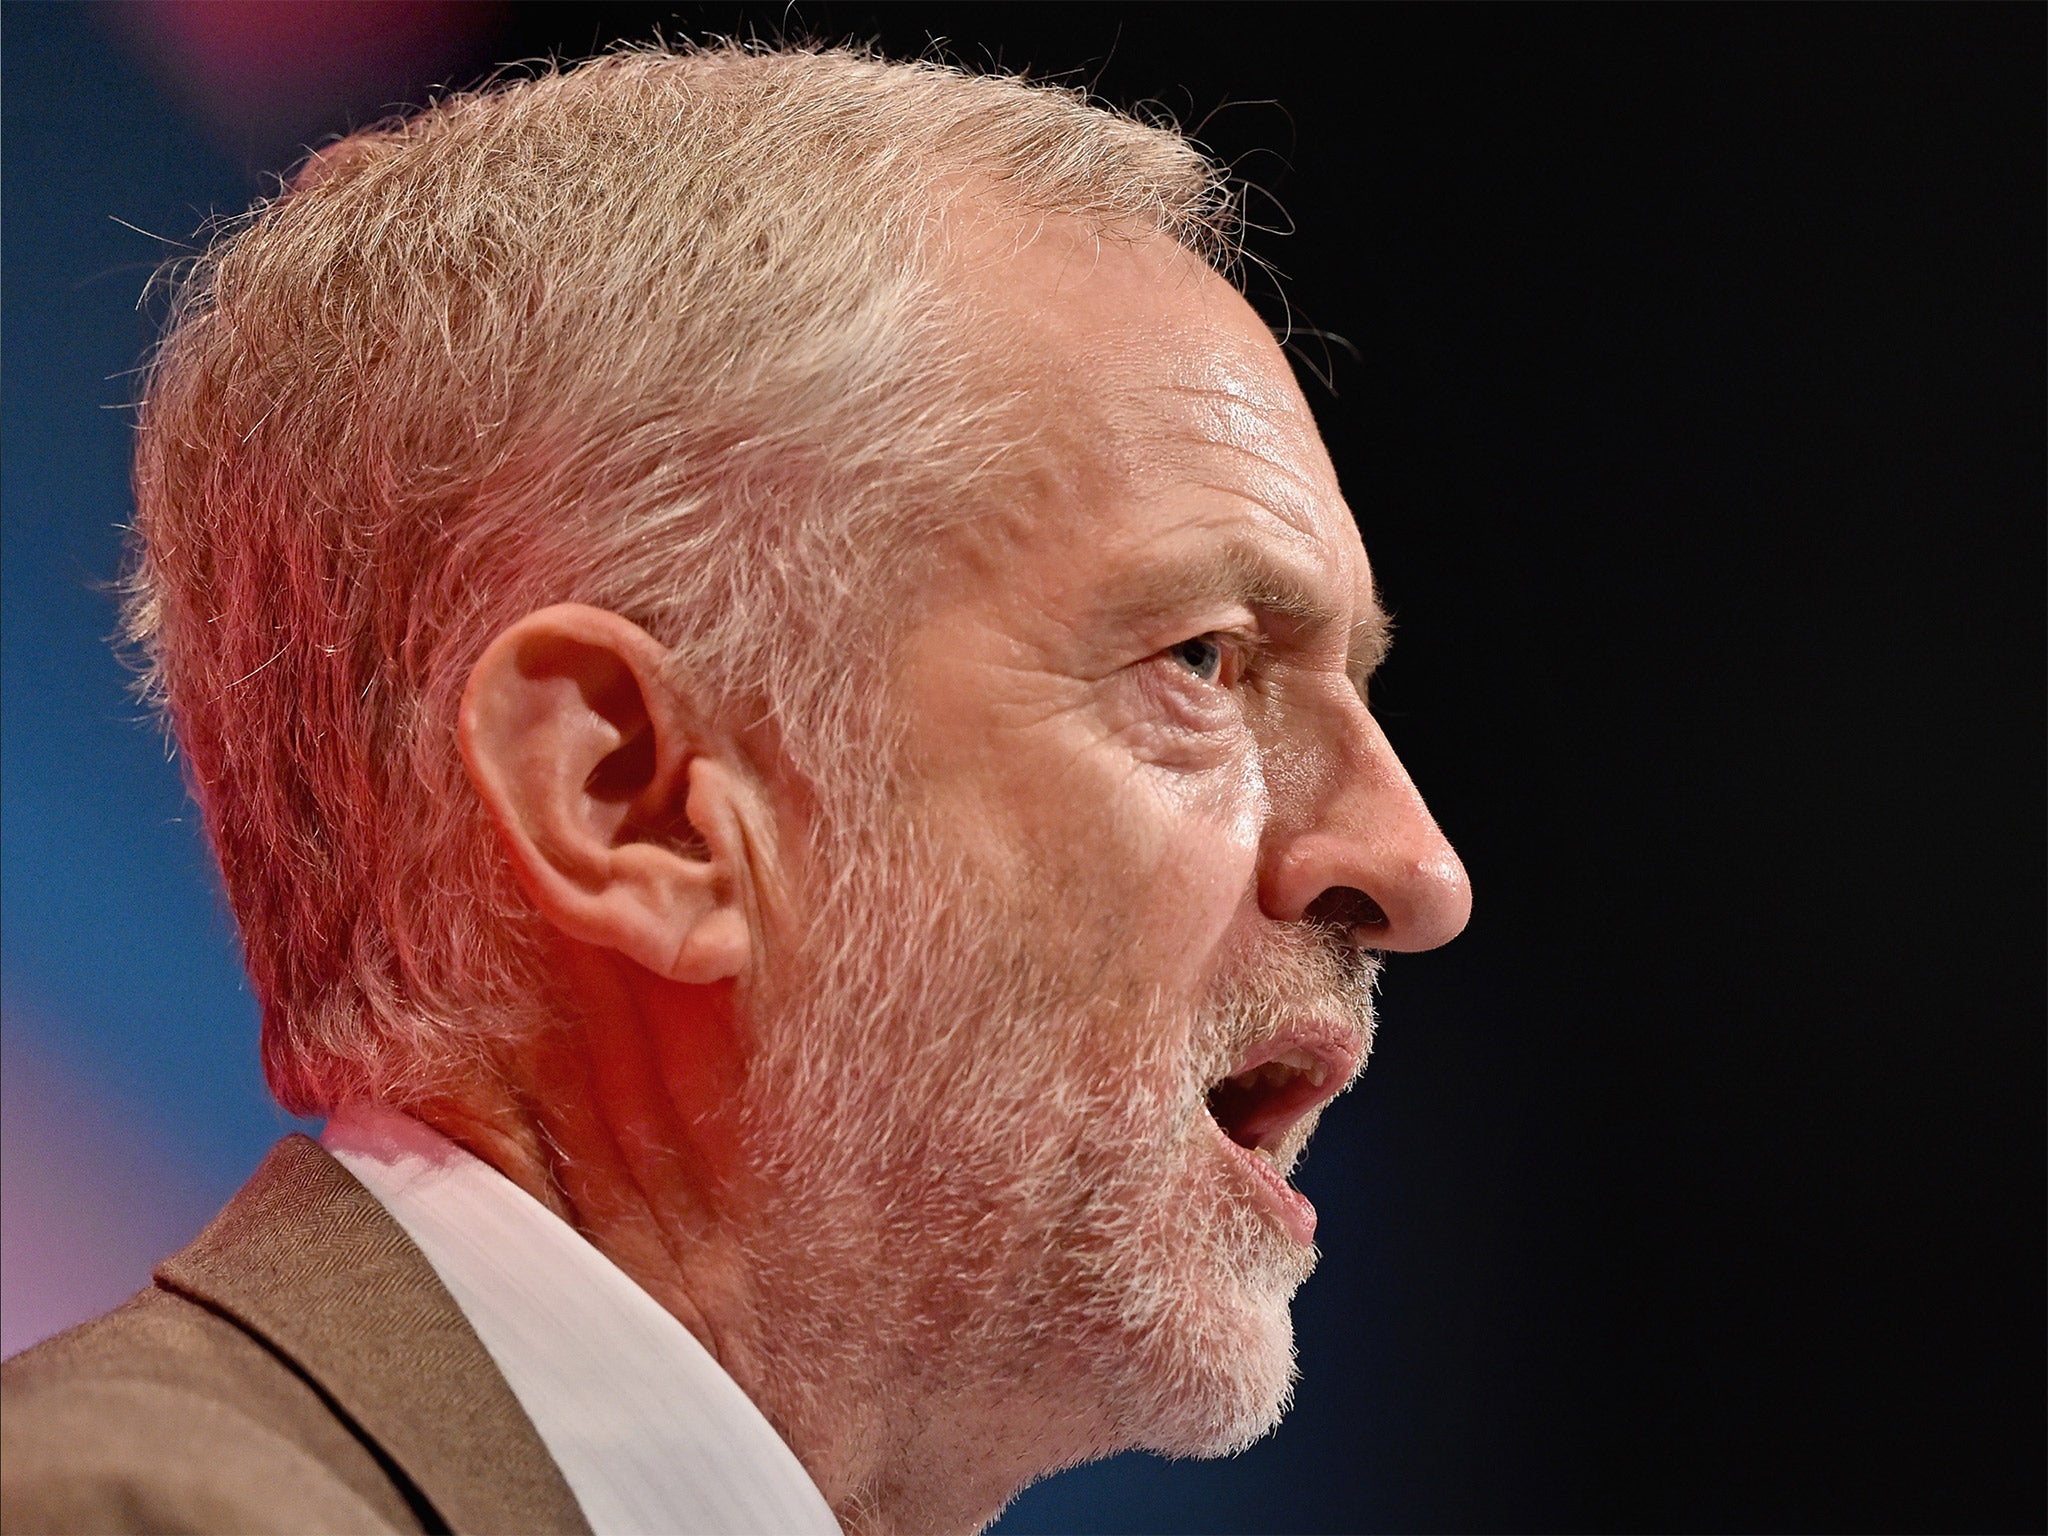 Jeremy Corbyn delivers his first speech as the Labour leader